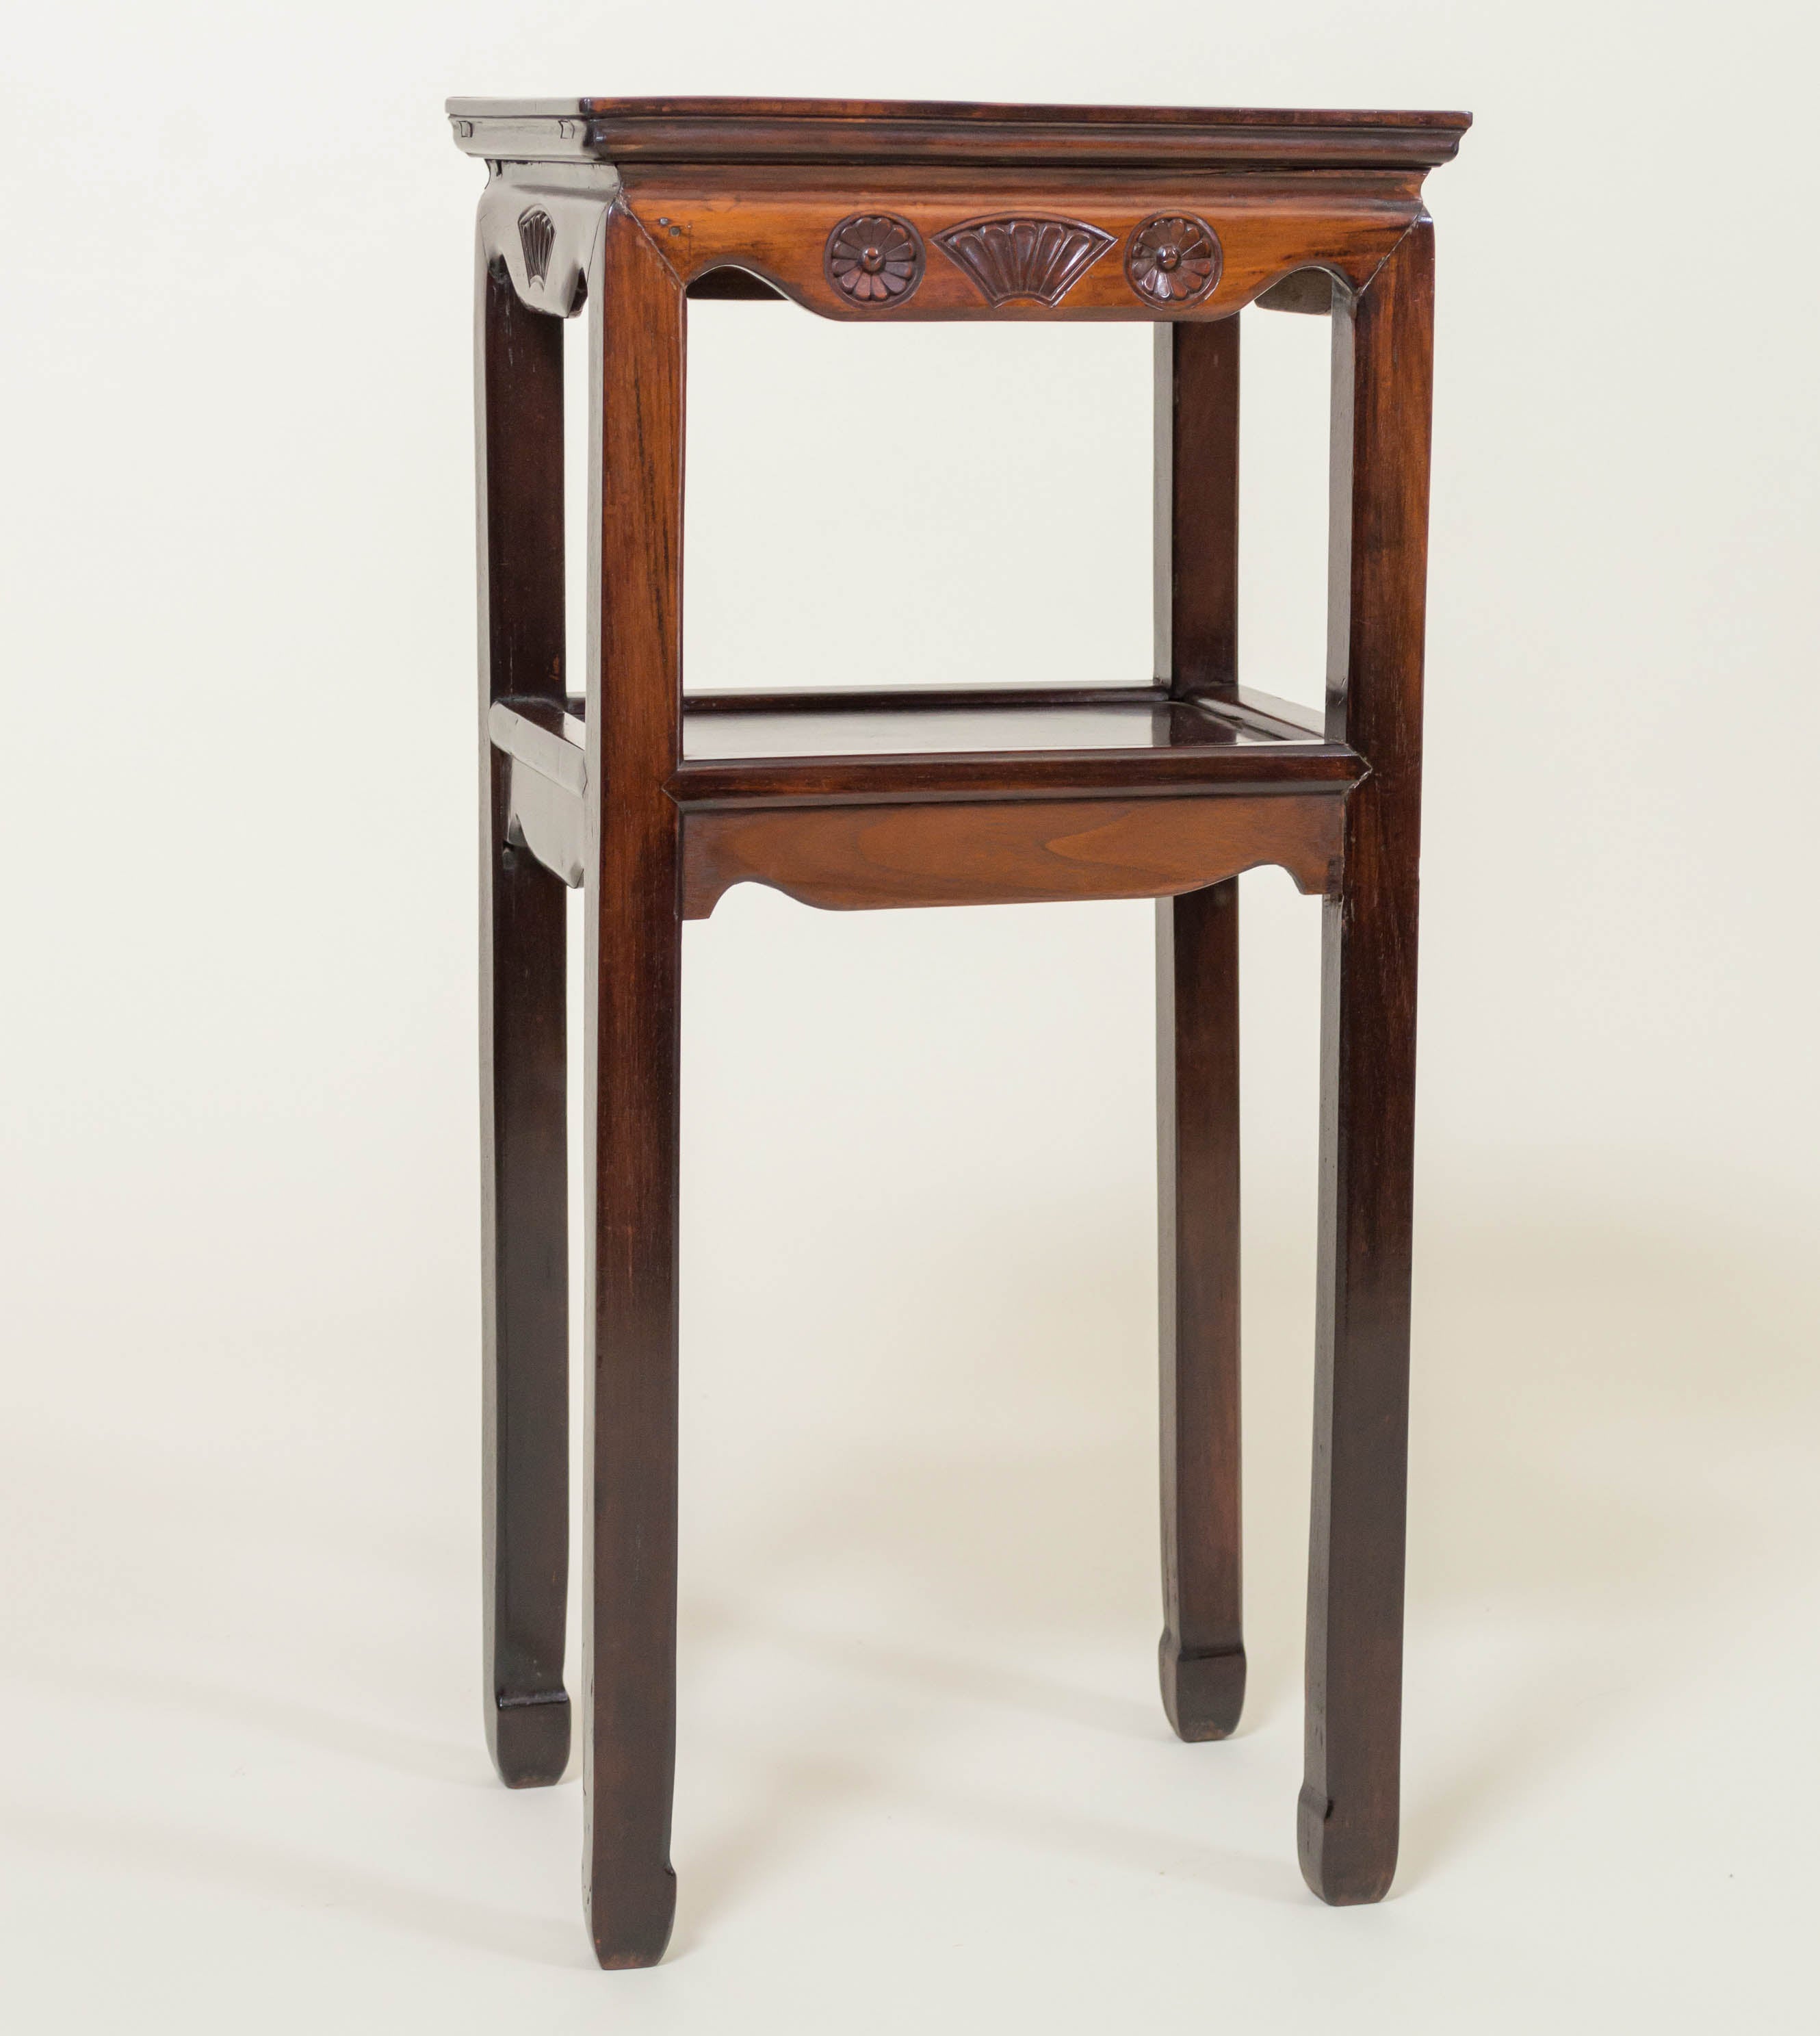 Chinese Tea Table or Stand, circa 1900